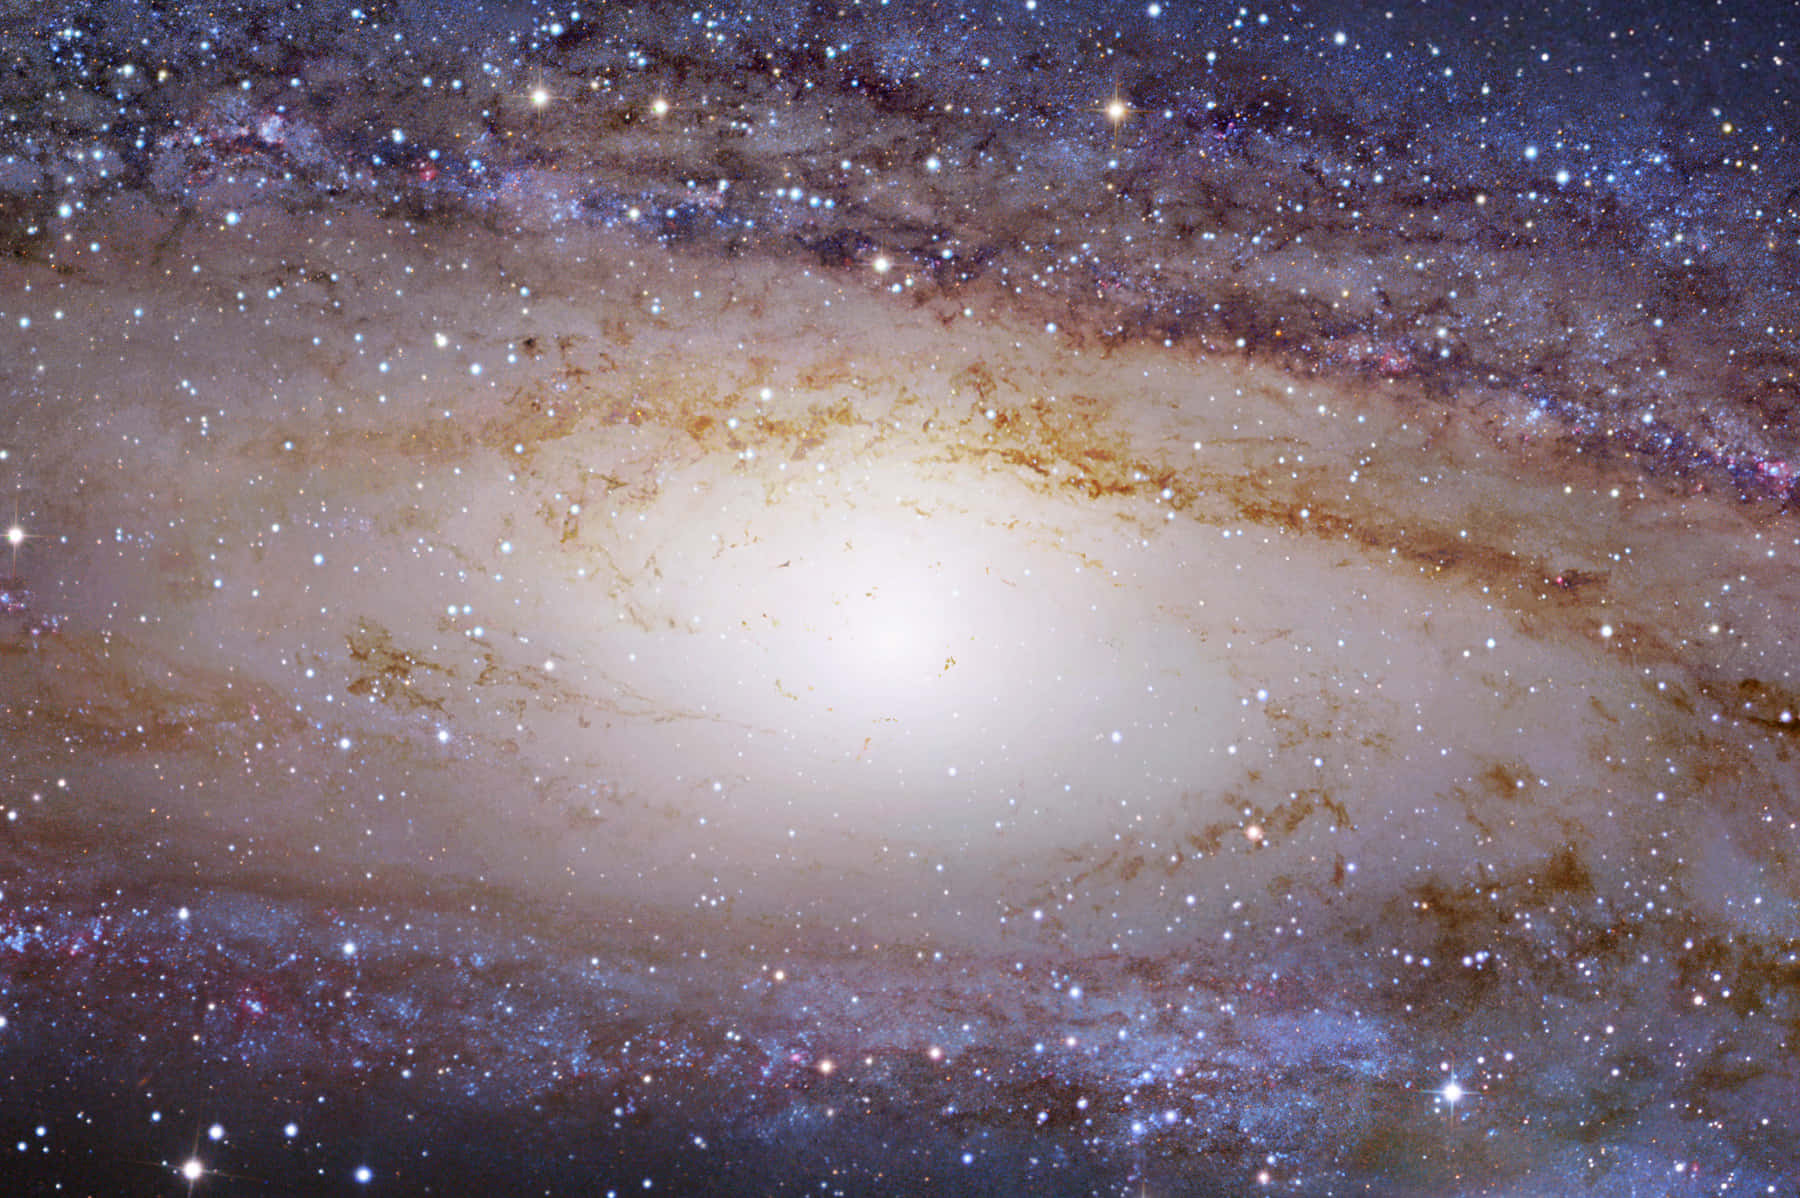 "The Remarkable, Mesmerizing Milky Way's Sister, the Andromeda Galaxy" Wallpaper